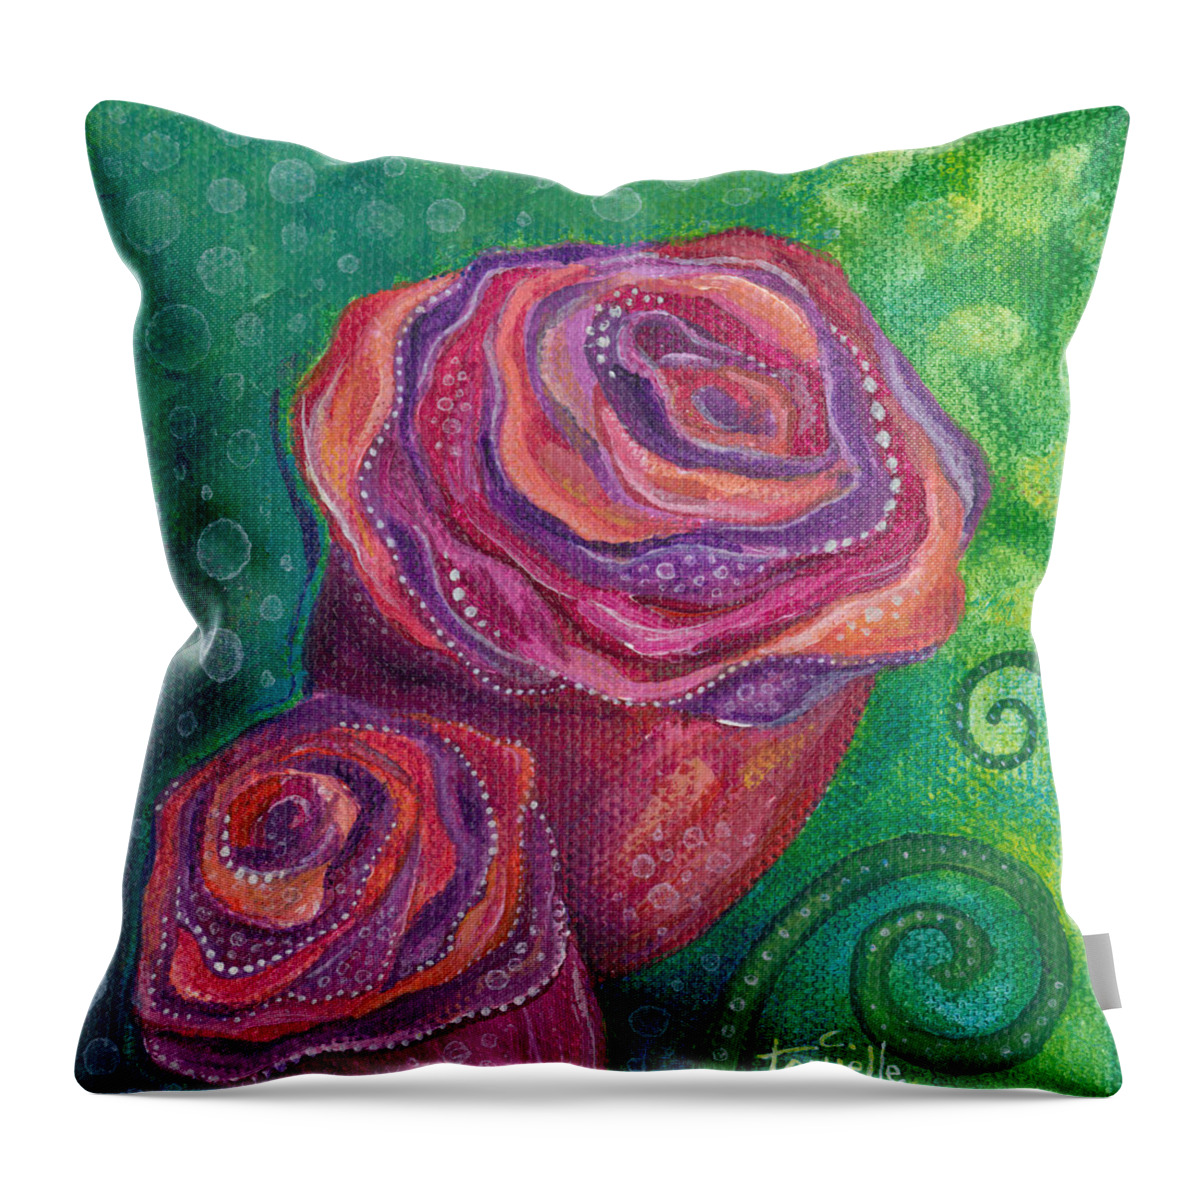 Floral Throw Pillow featuring the painting Love by Tanielle Childers